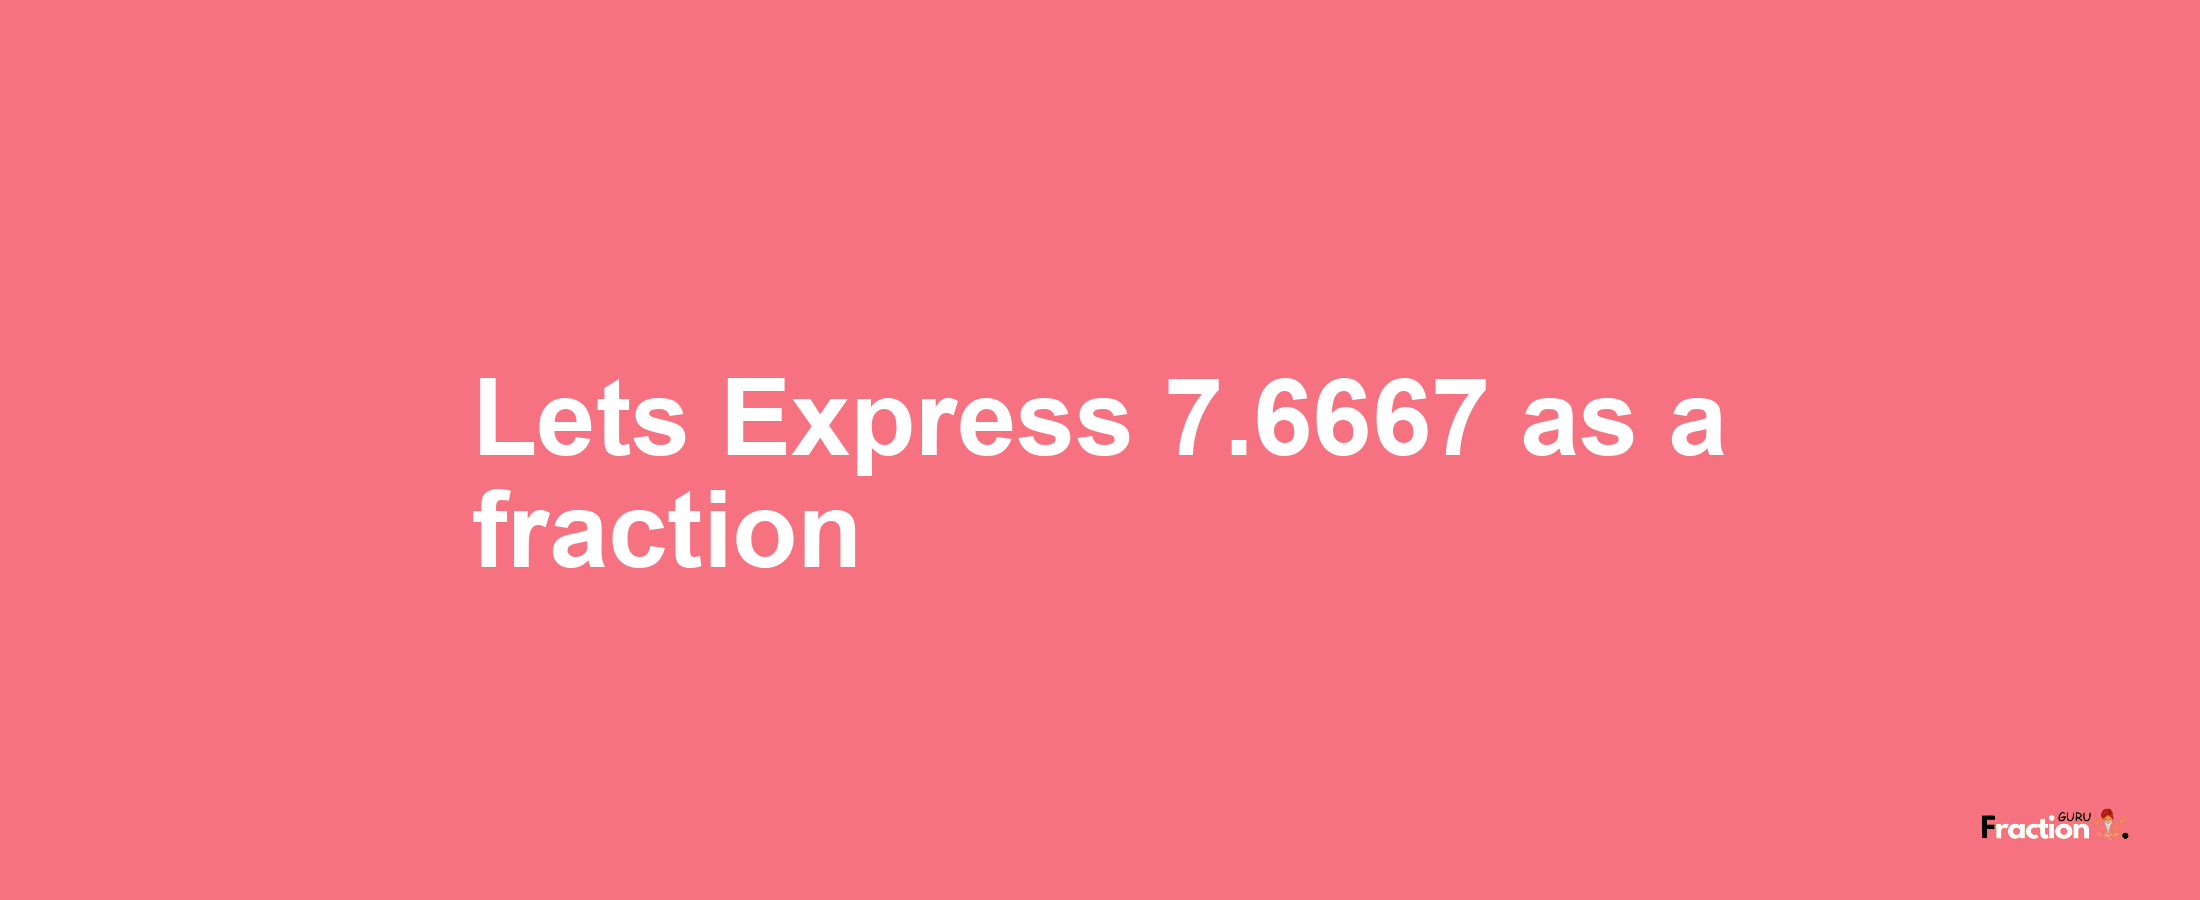 Lets Express 7.6667 as afraction